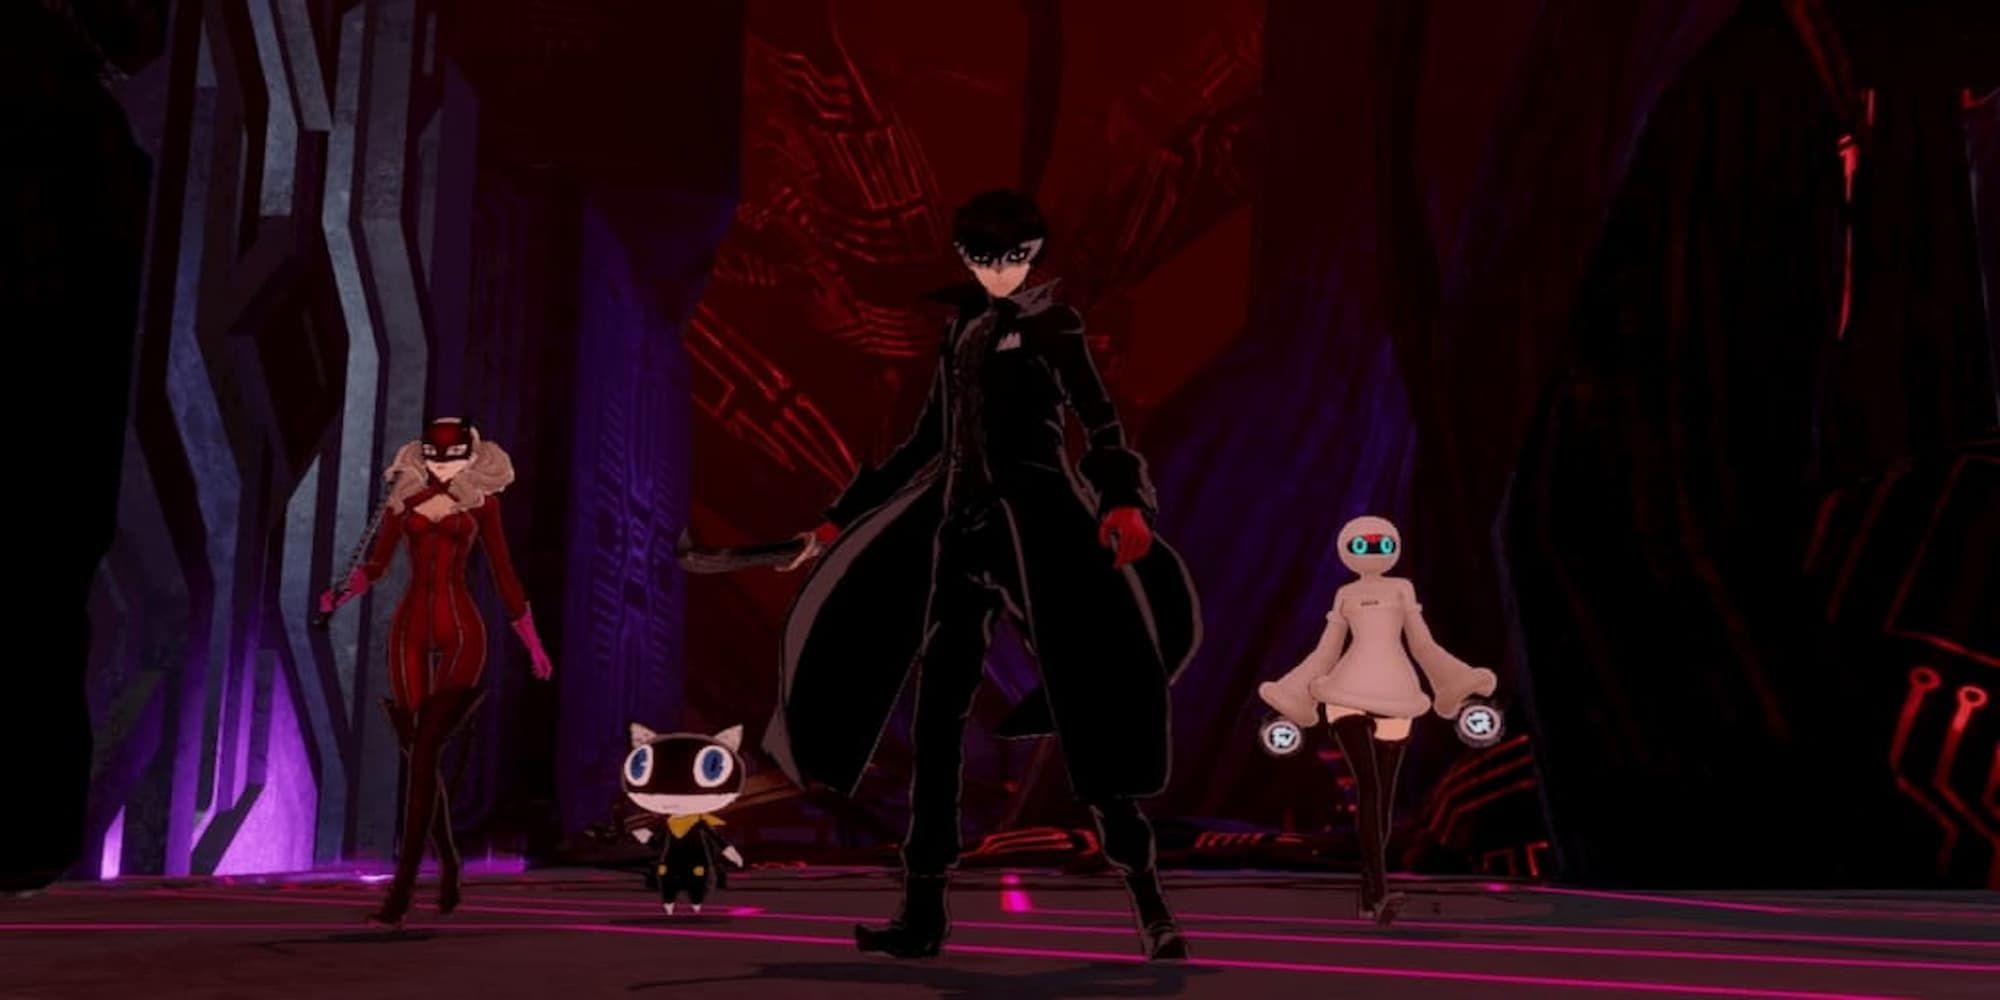 Phantom Thieves Entering The Jail Of The Abyss